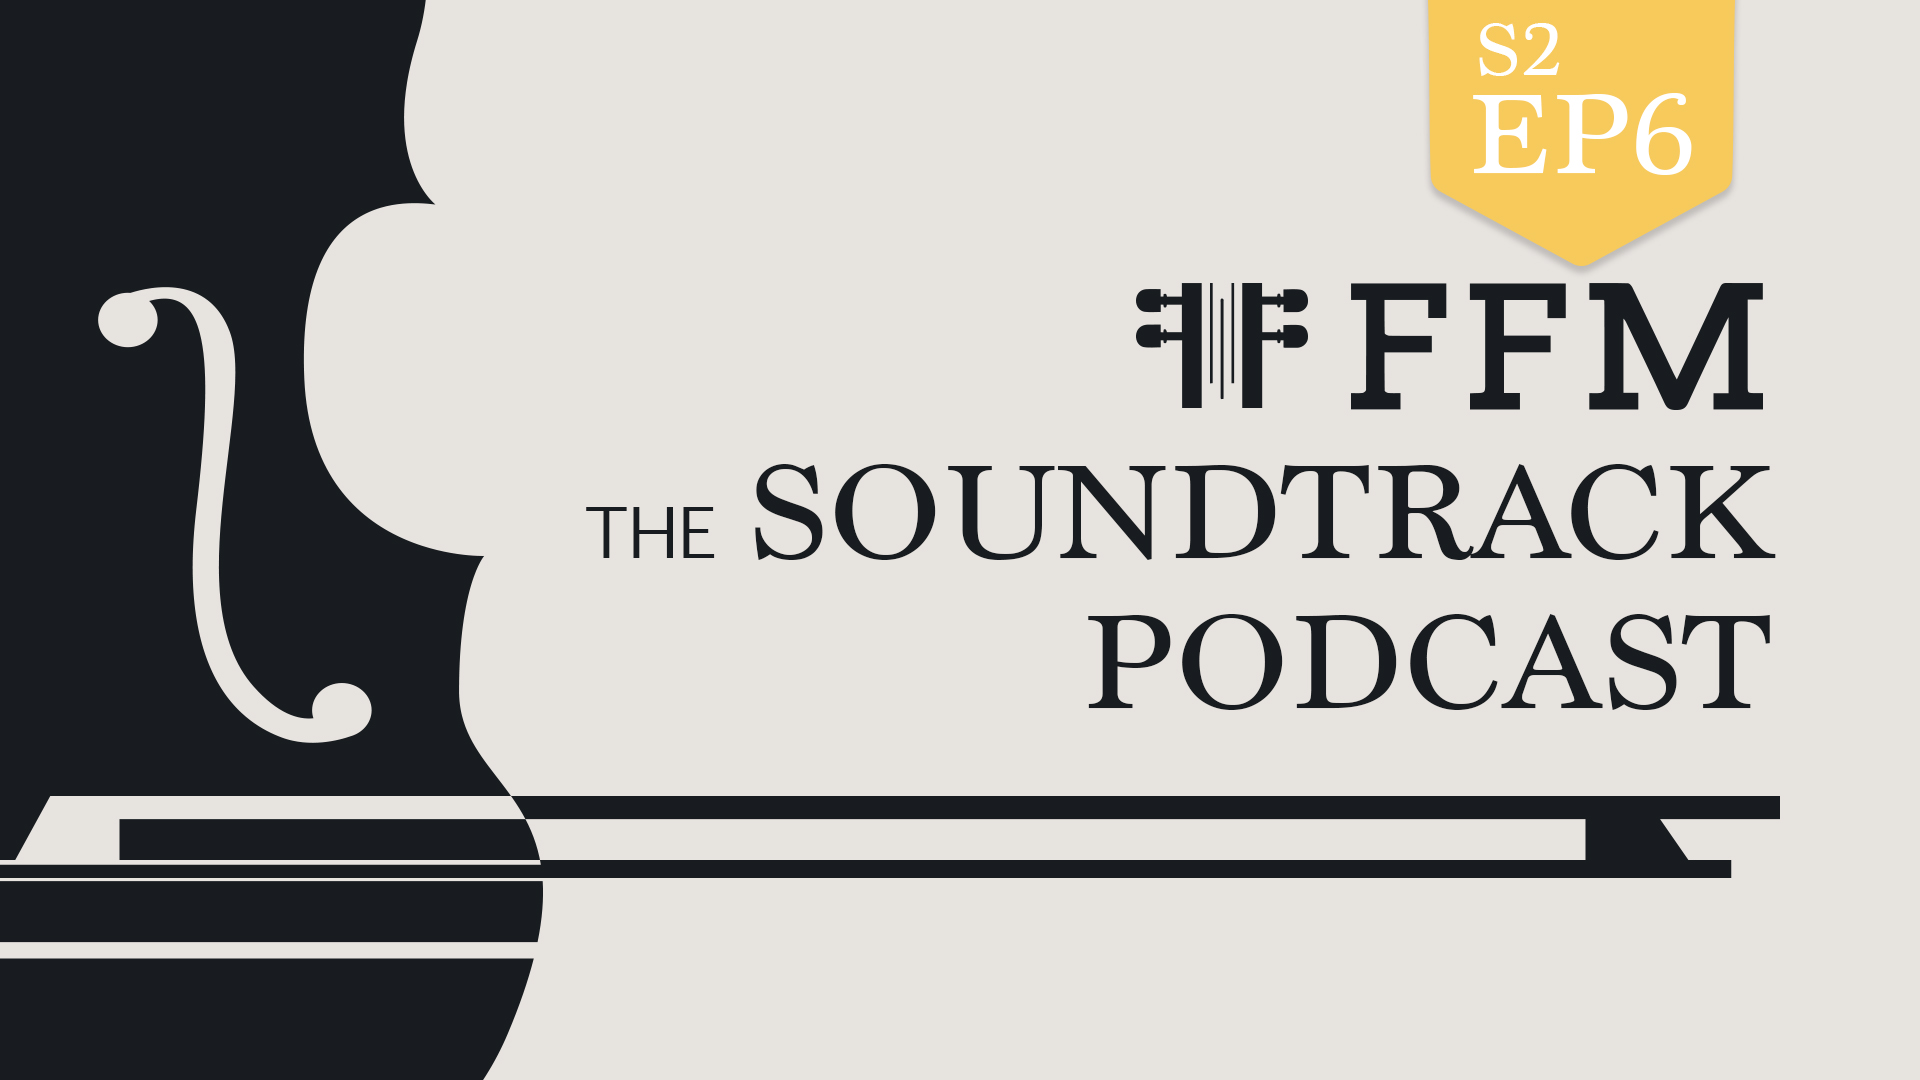 FFM THE SOUNDTRACK PODCAST - S2, EP6 WITH Jamie Christopherson